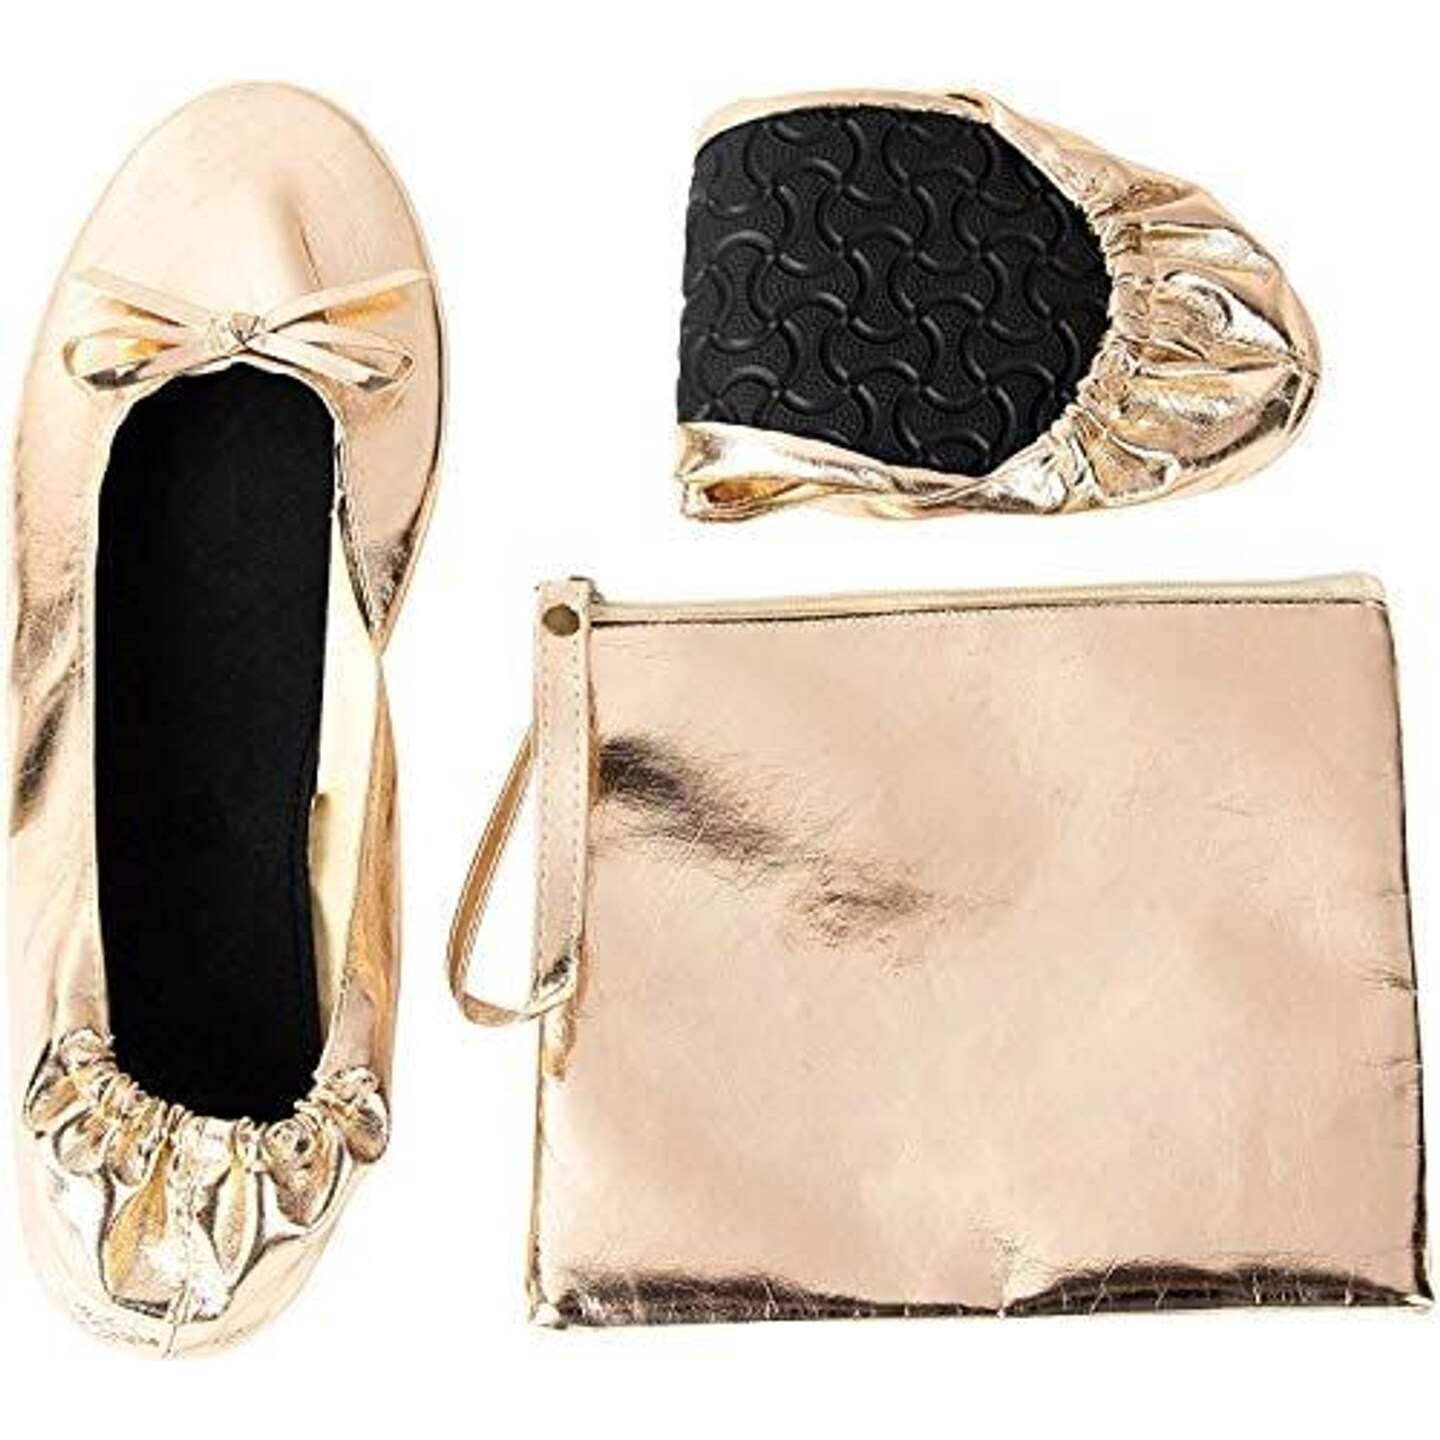 Nude Foldable Ballet Flats for Women, US Size 10-11